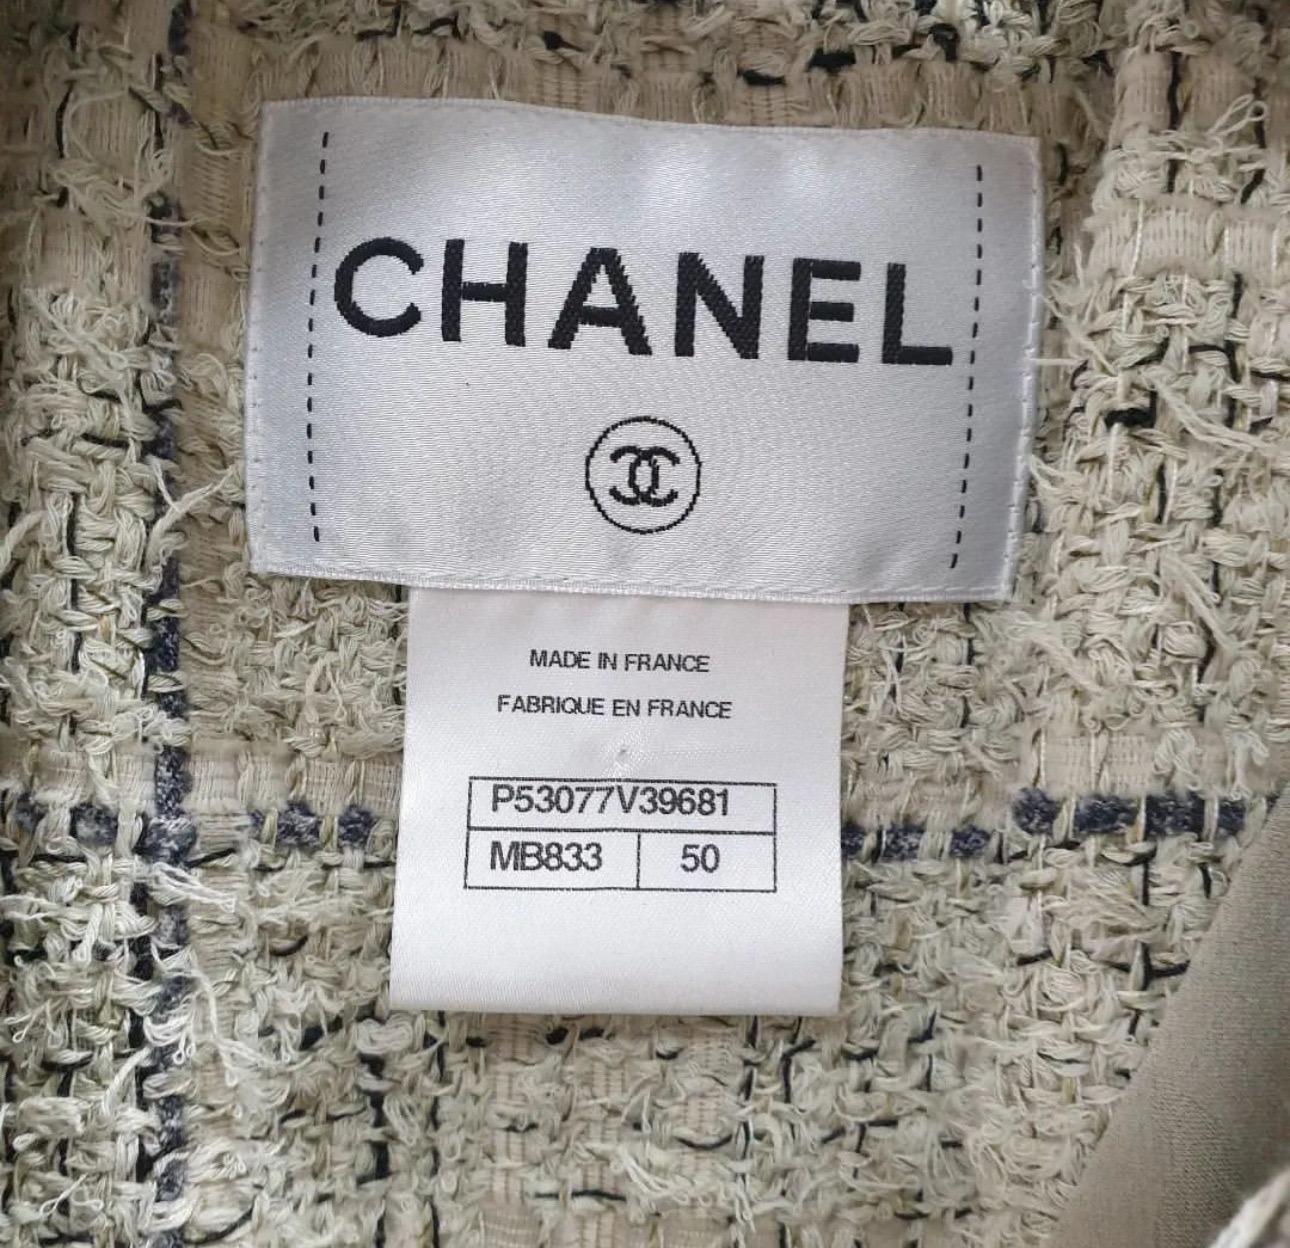 Timeless Chanel jacket from Runway of Paris / SEOUL Cruise Collection.
- made of precious lesage woven tweed in noble light beige colour
- double rows of CC logo buttons
- full silk lining, chain link at hem


Sz.50 Comes as oversized.

Very good